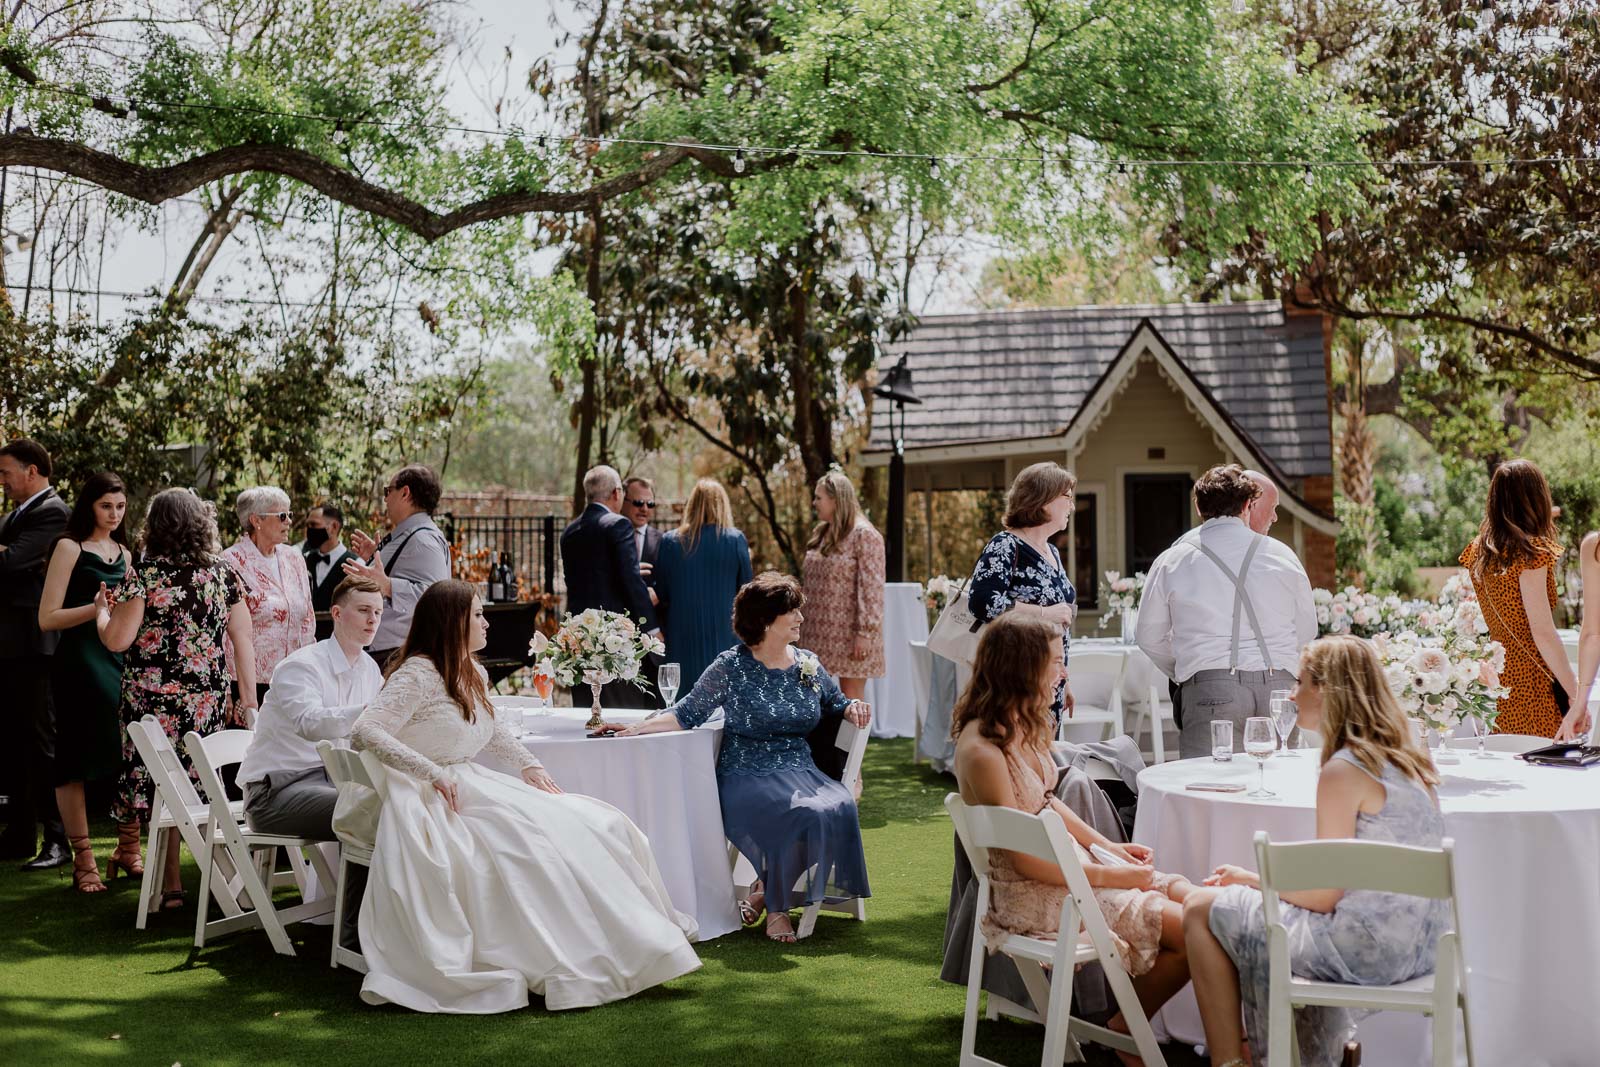 During the spring reception the photo shows guests mingling with the bride and groom sitting on the outside lawn chairs